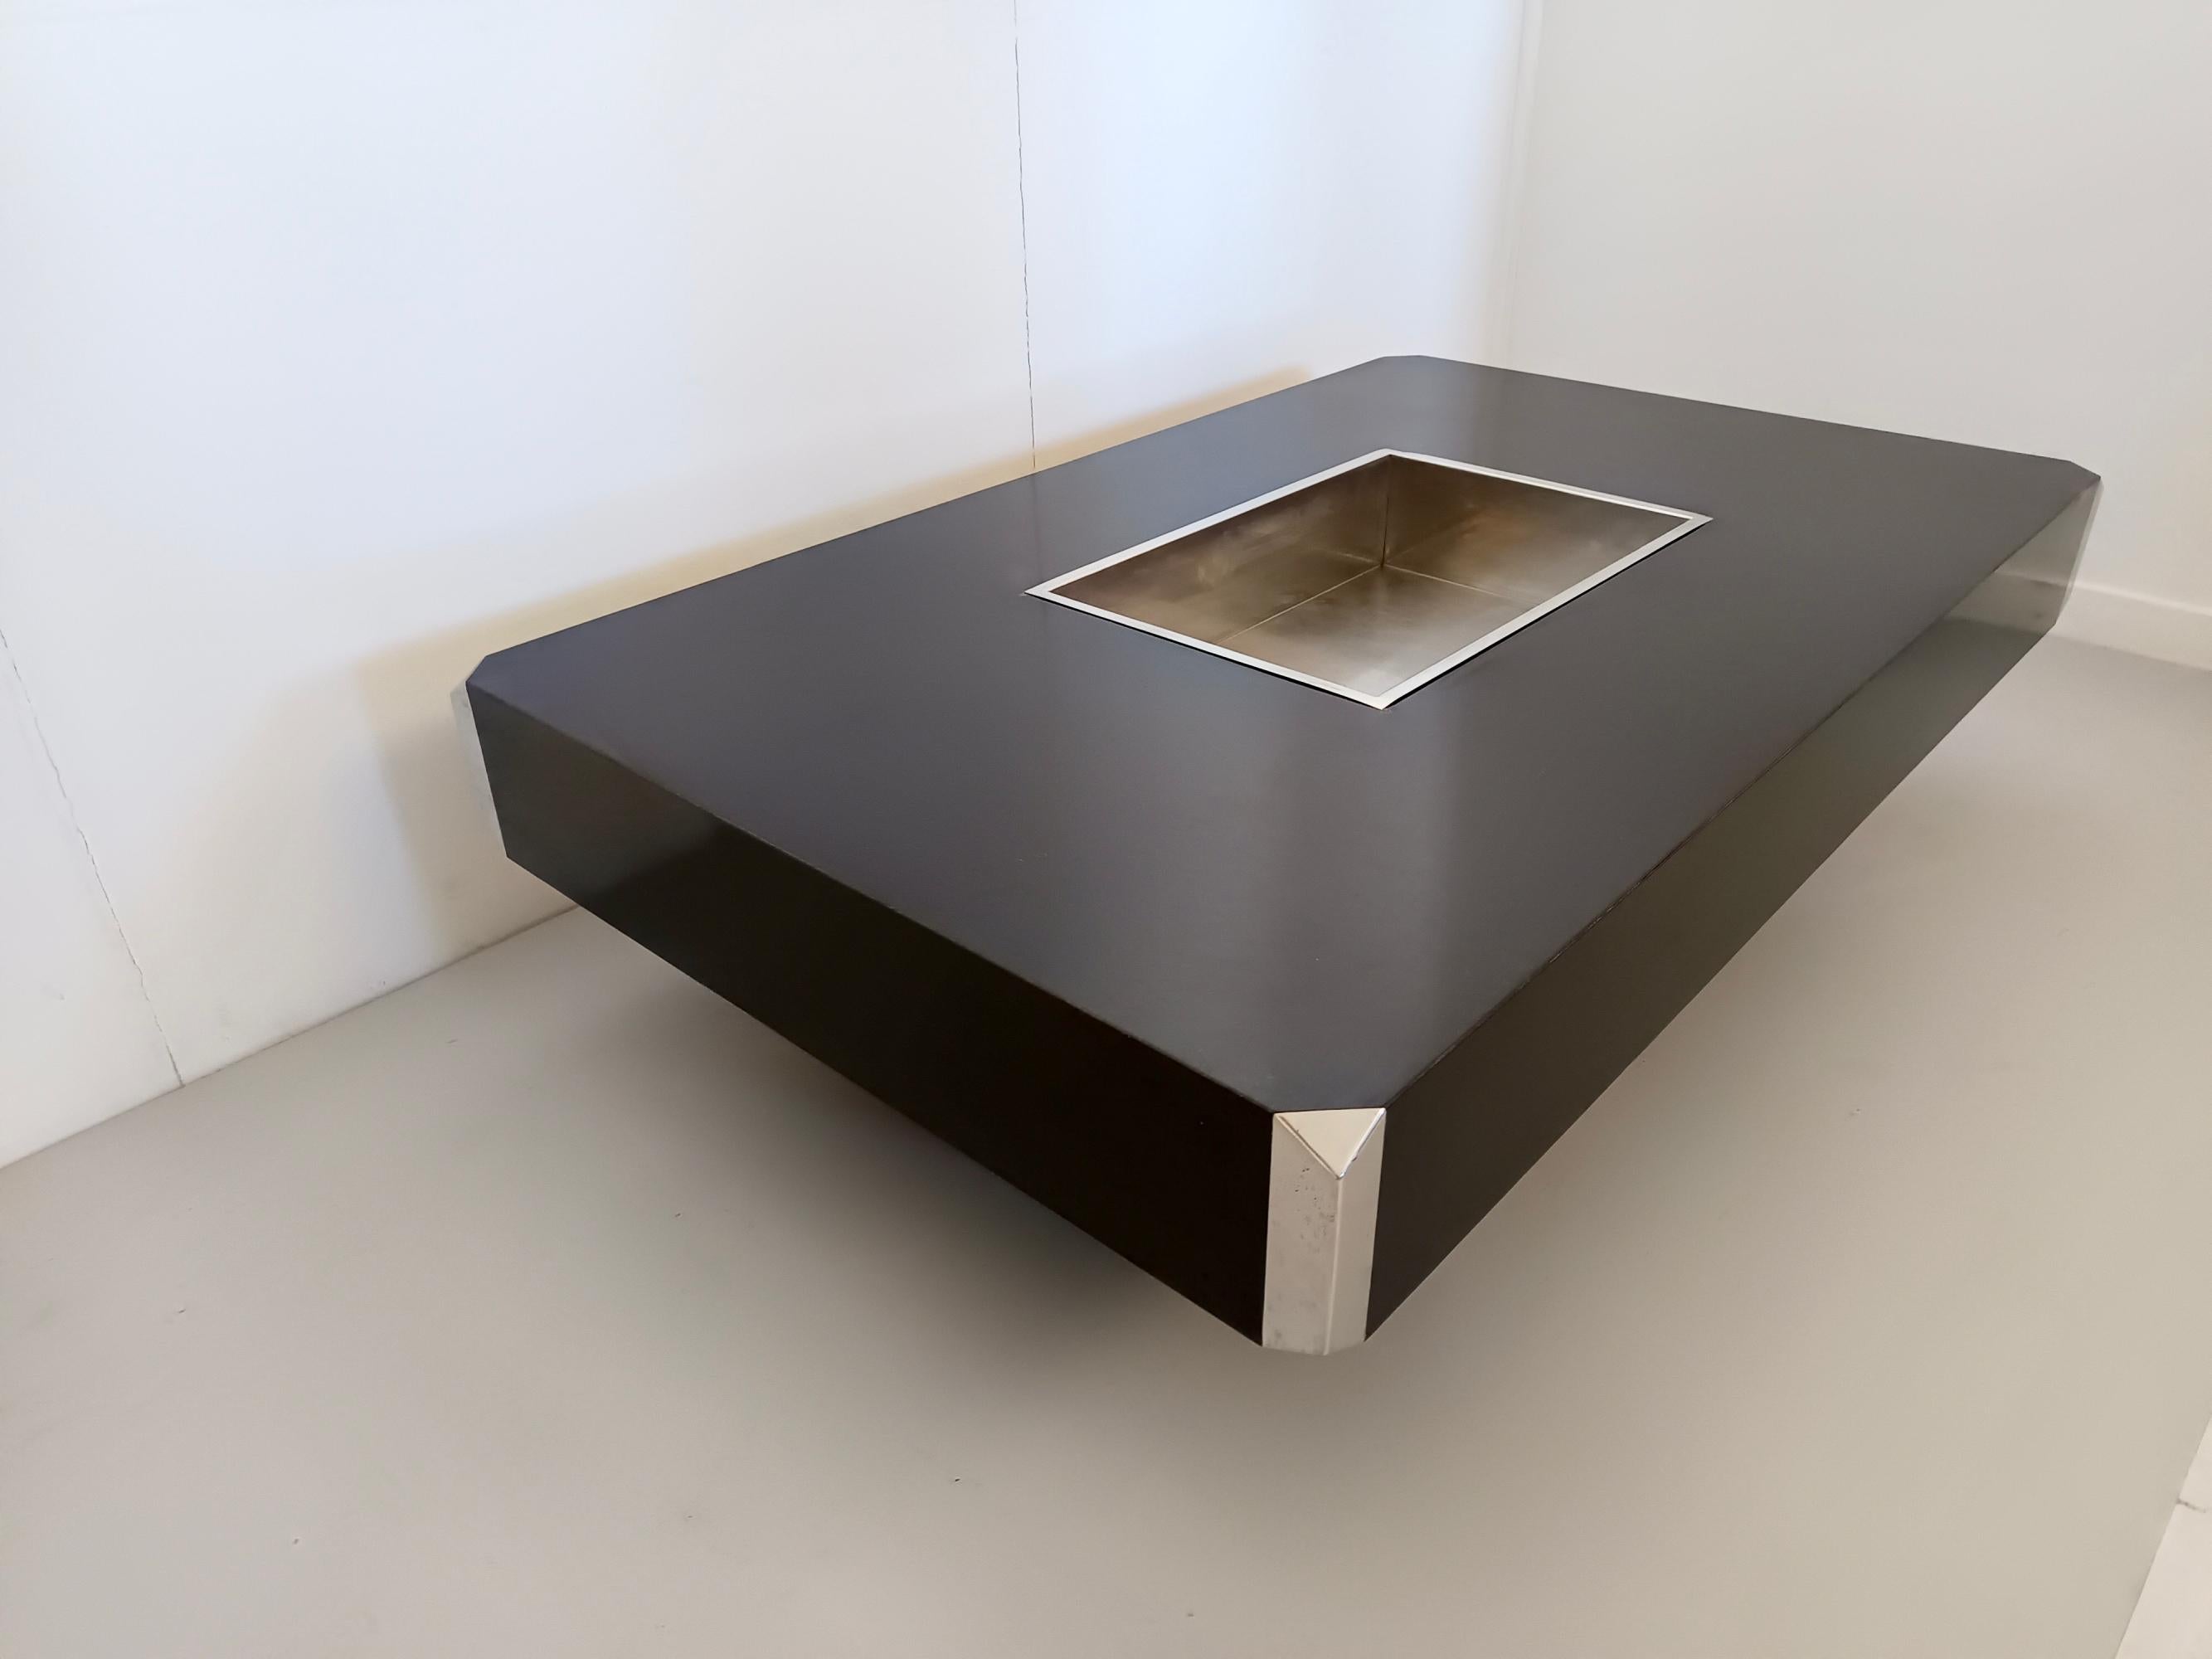 Plated Coffee Table mod. Alveo by Willy Rizzo for Sabot, 1972